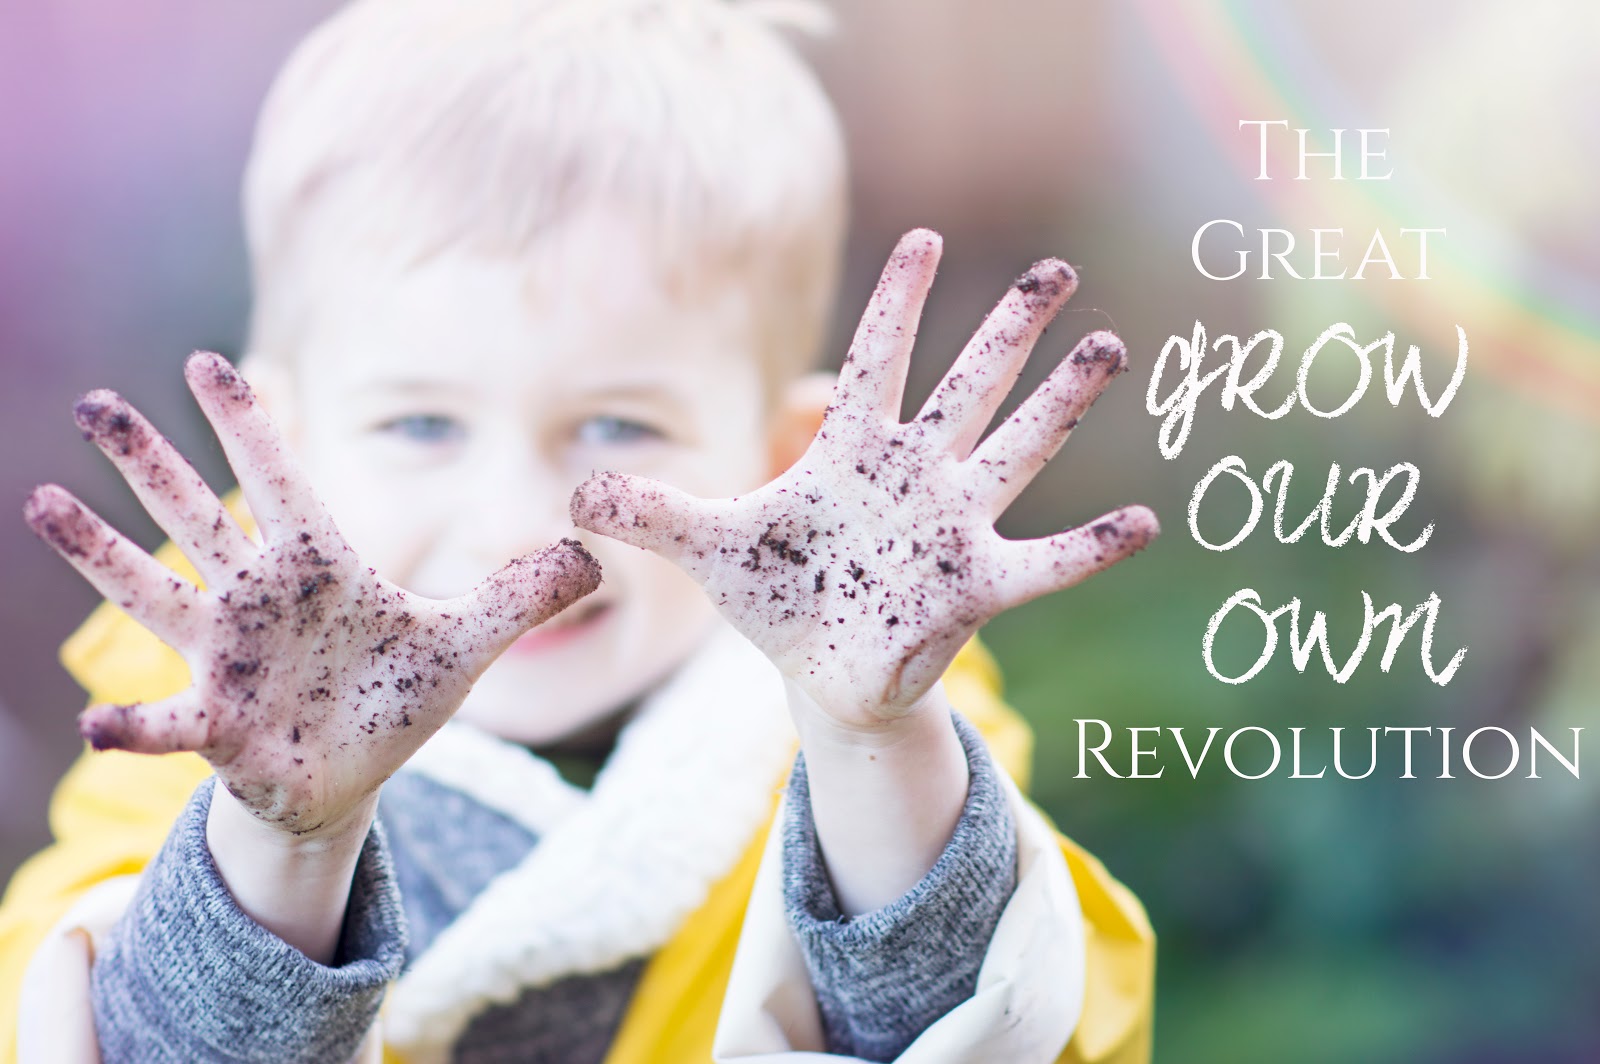 THE GREAT GROW OUR OWN REVOLUTION